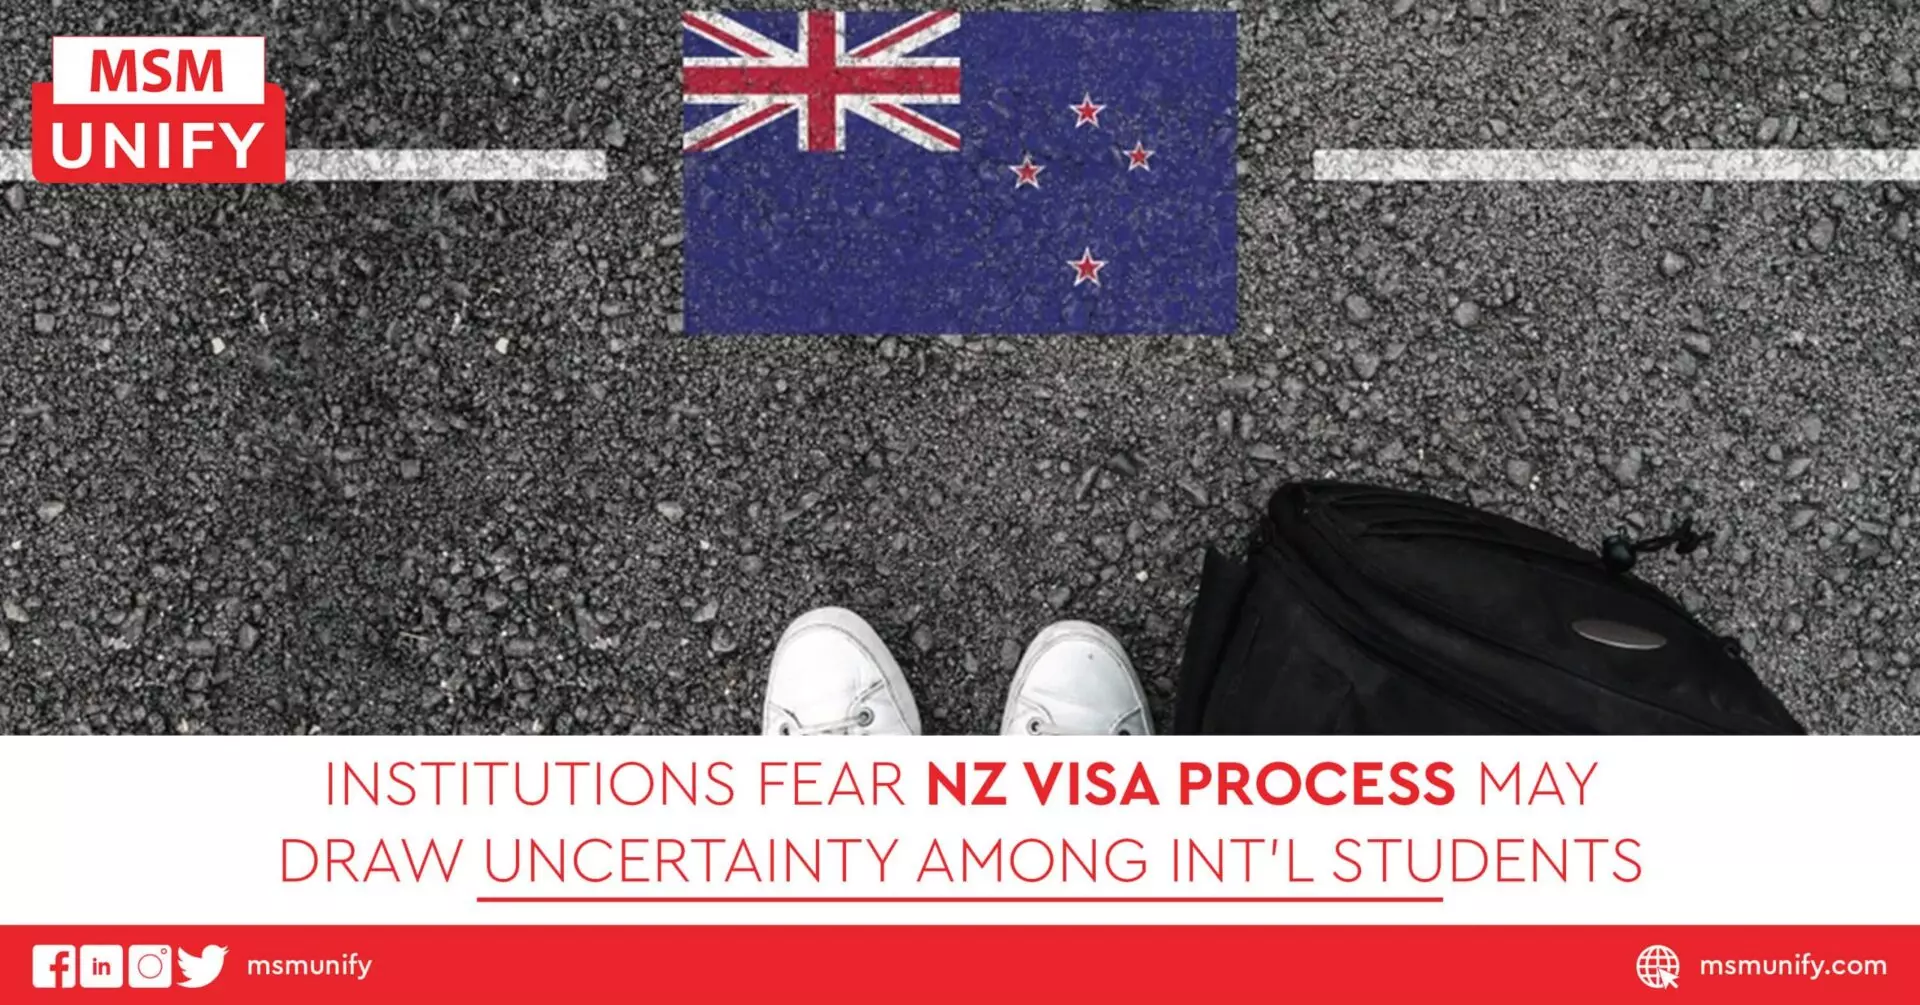 Institutions Fear NZ Visa Process May Draw Uncertainty Among Intl Students scaled 1